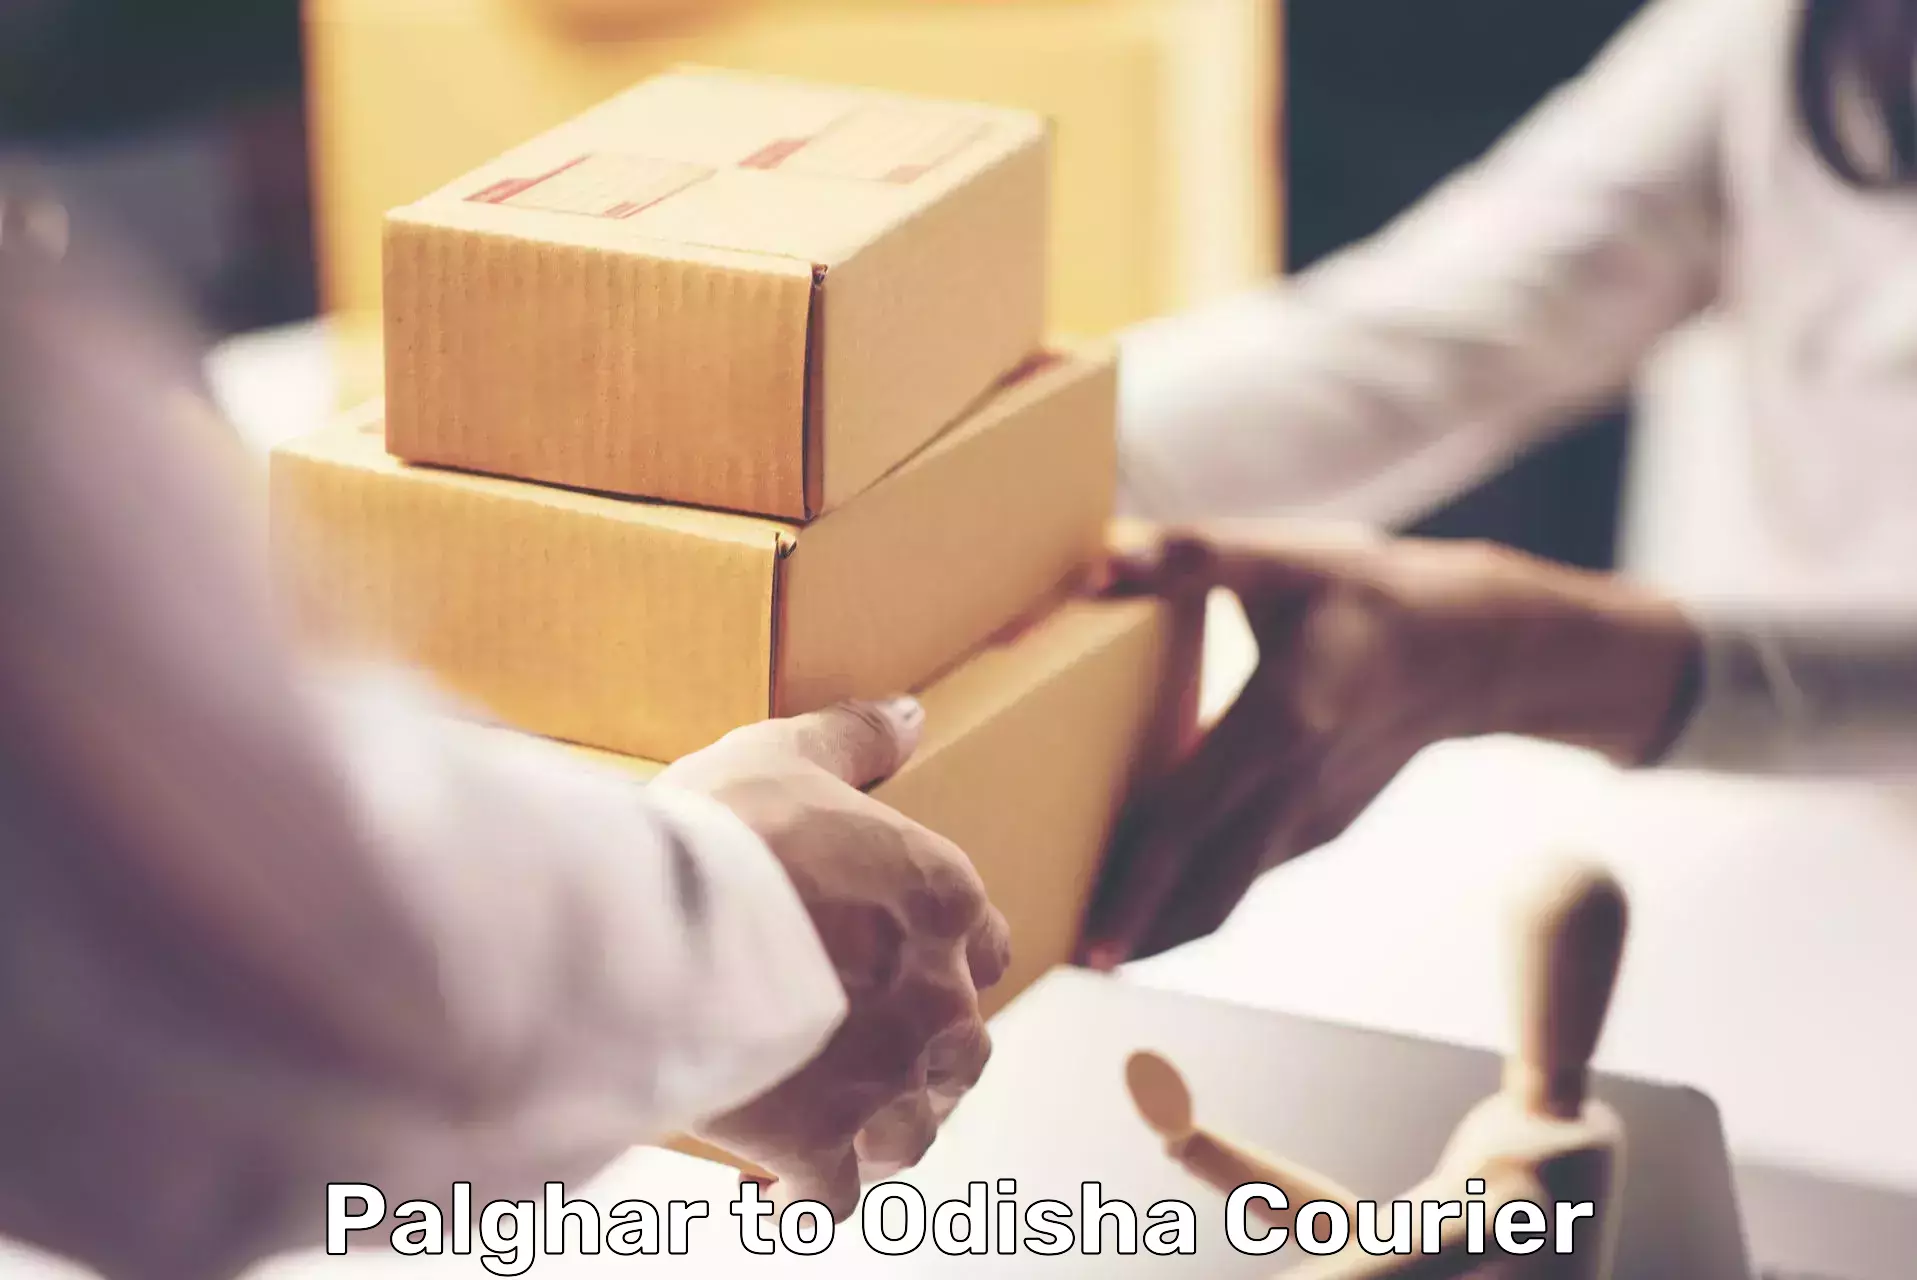 Easy return solutions Palghar to Cuttack